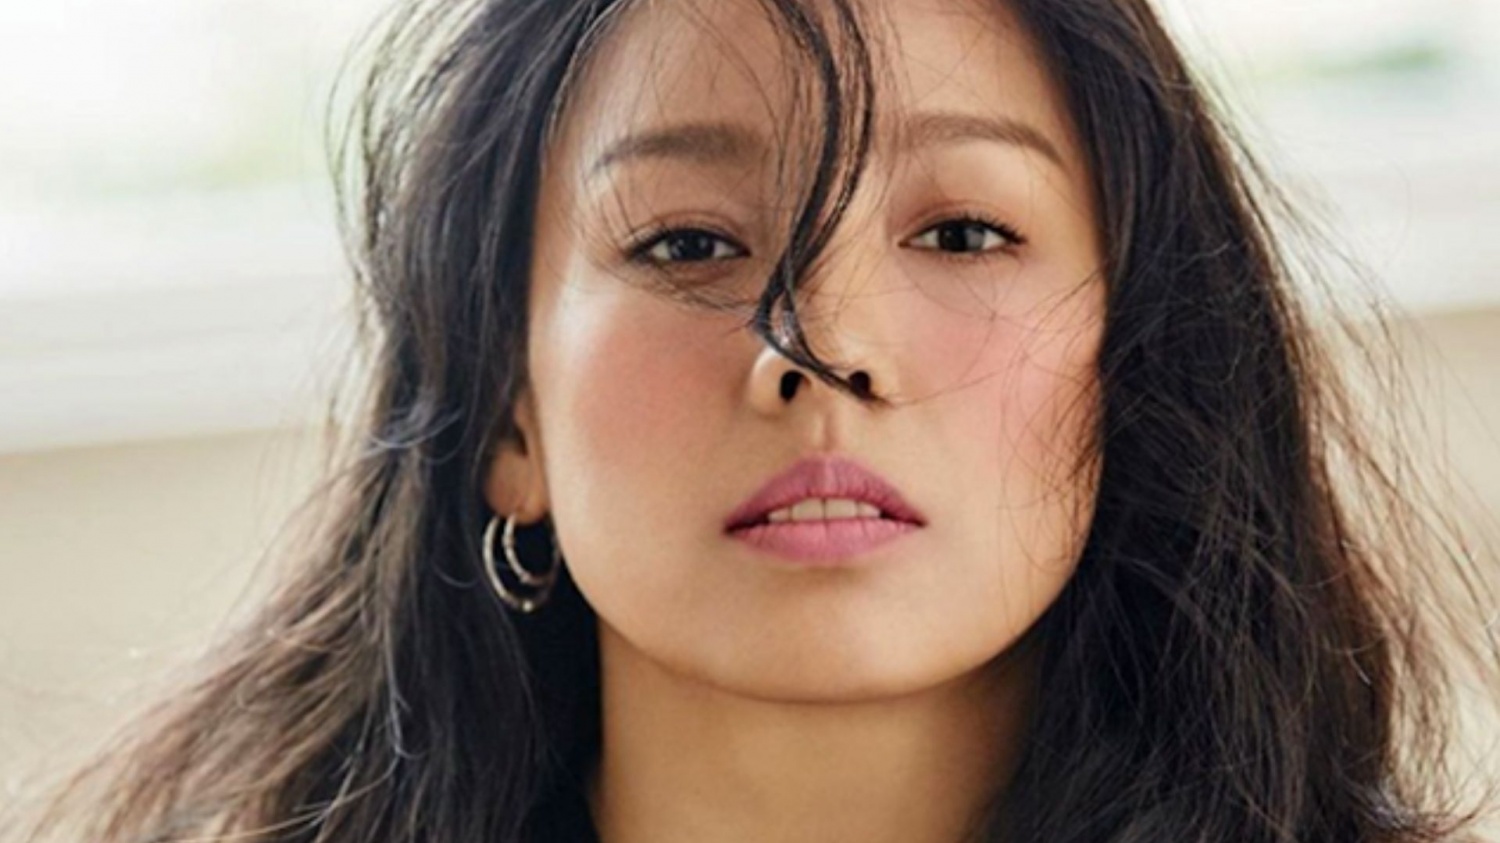 Lee Hyori Surprising Revelation: 1 12 months With out Kiss From Husband ...